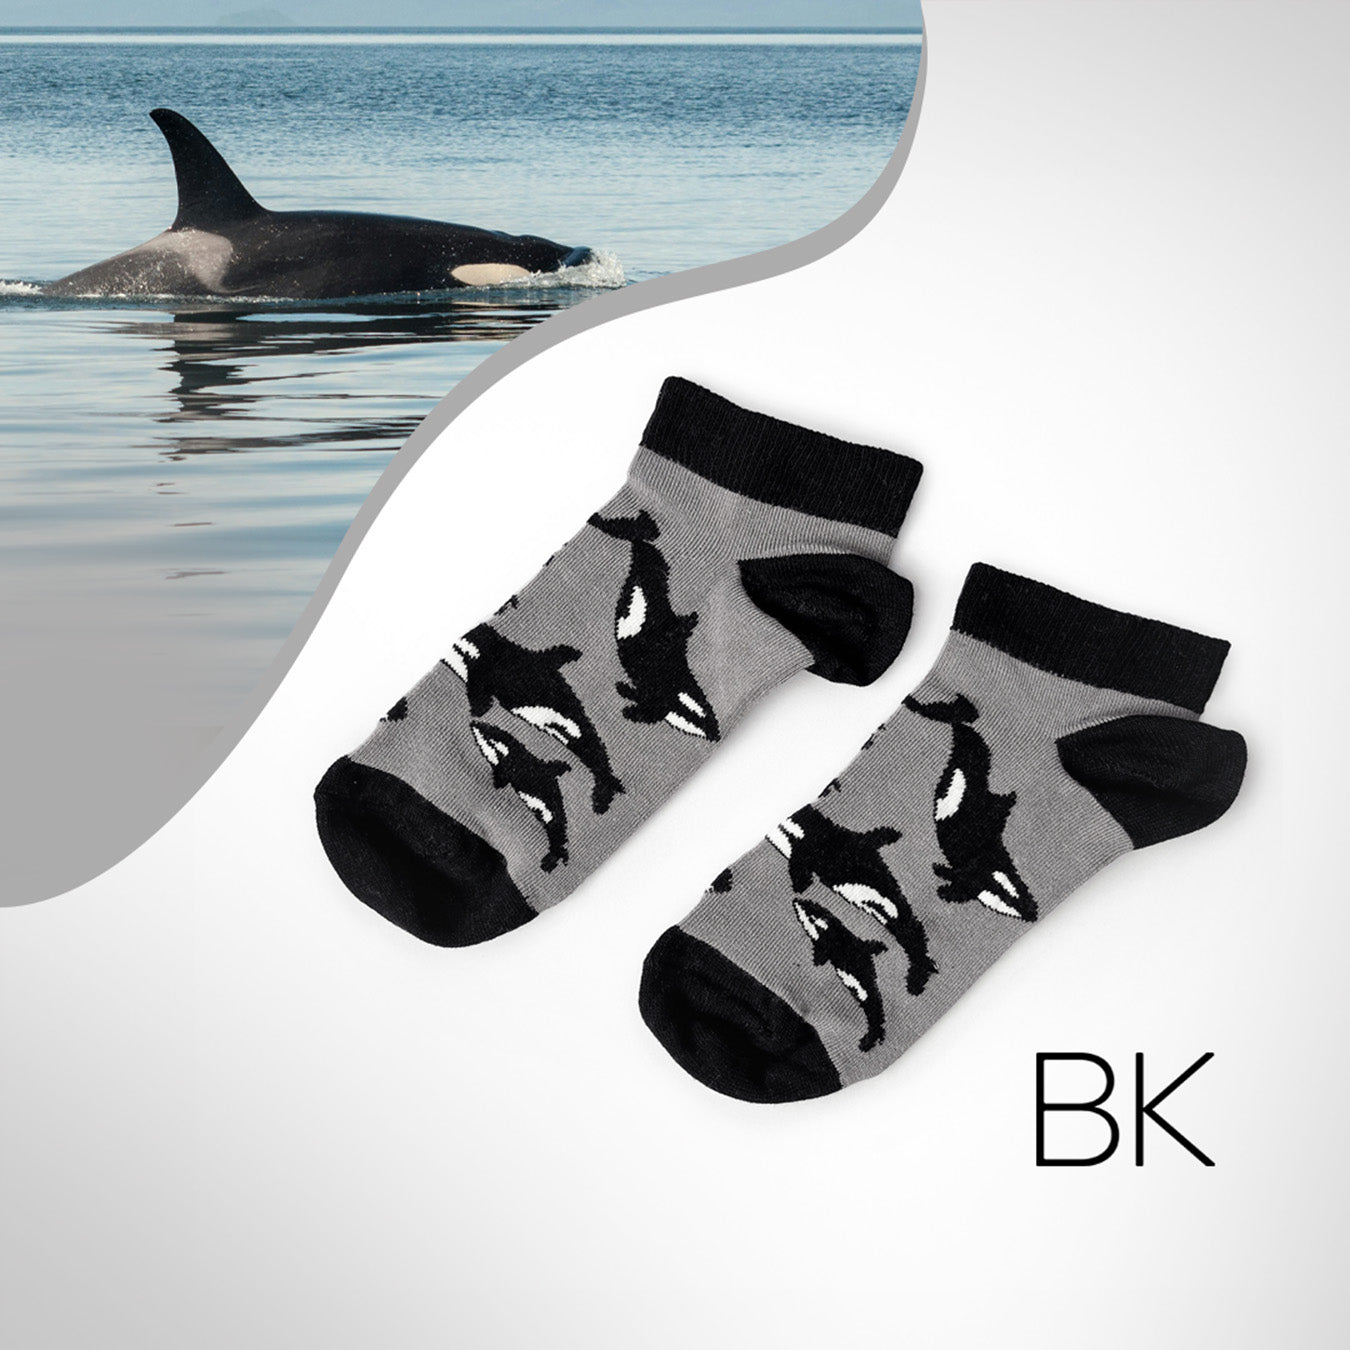 black and white orca trainer bamboo socks with orca imagery